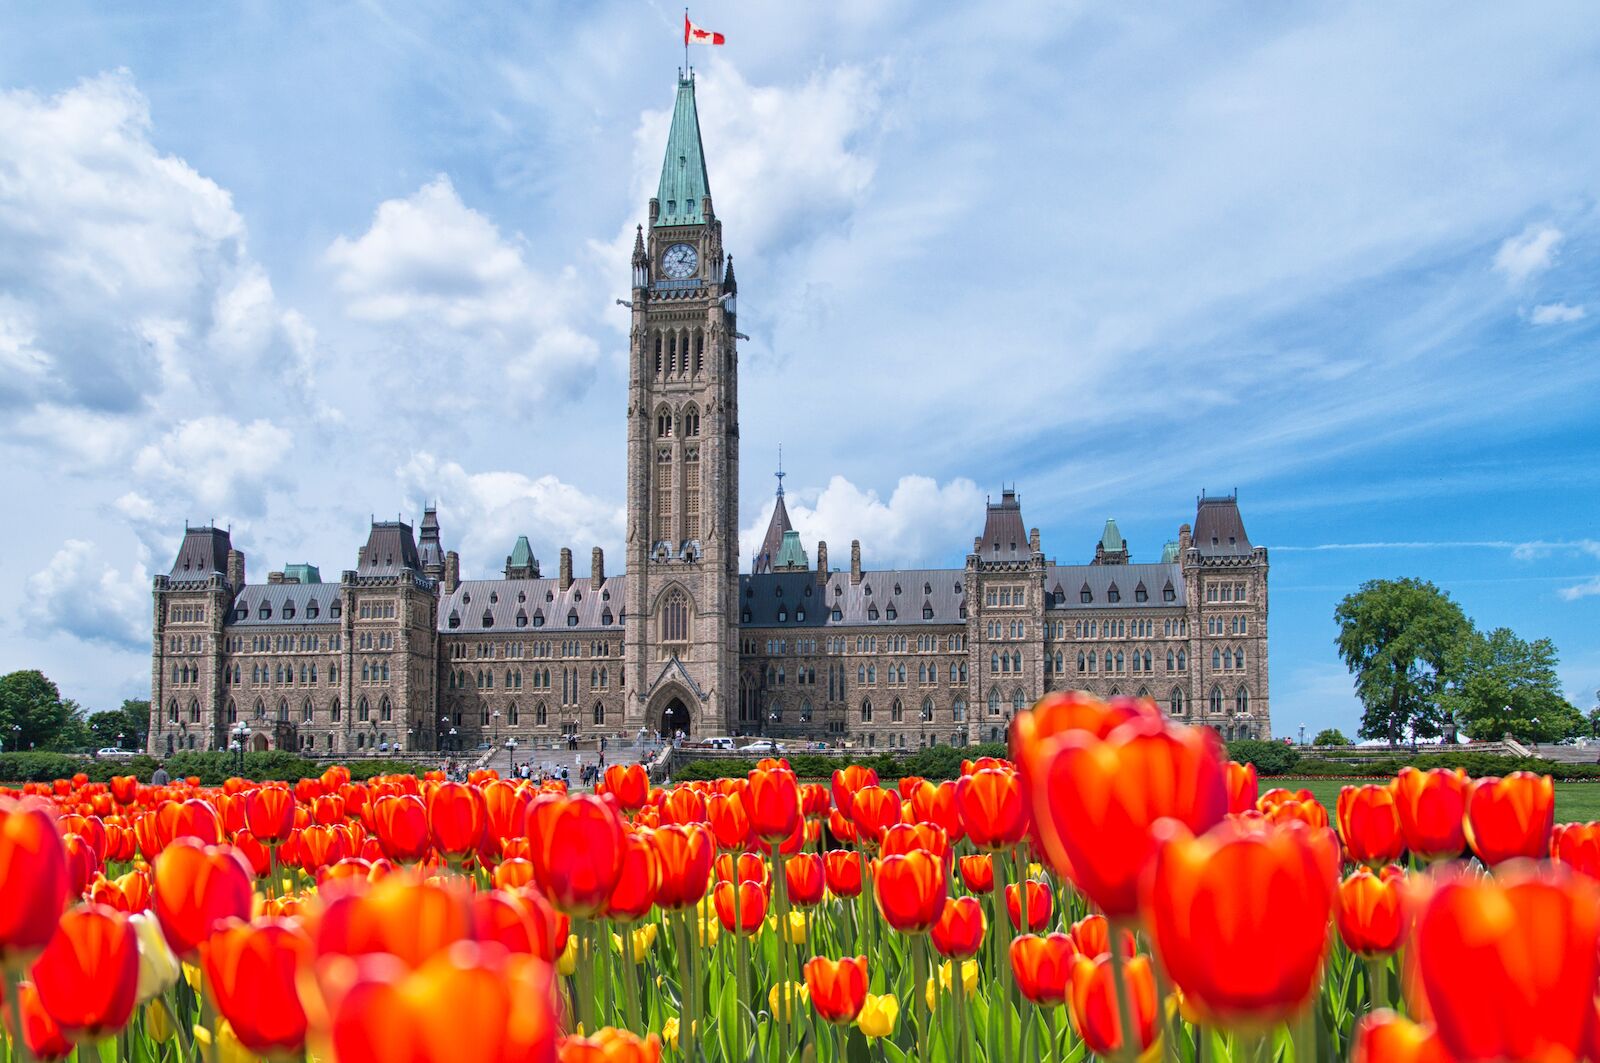 bright bed of tulips in front of the Canadian Parliament in Ottawa Canada for the Canadian Tulip Festival